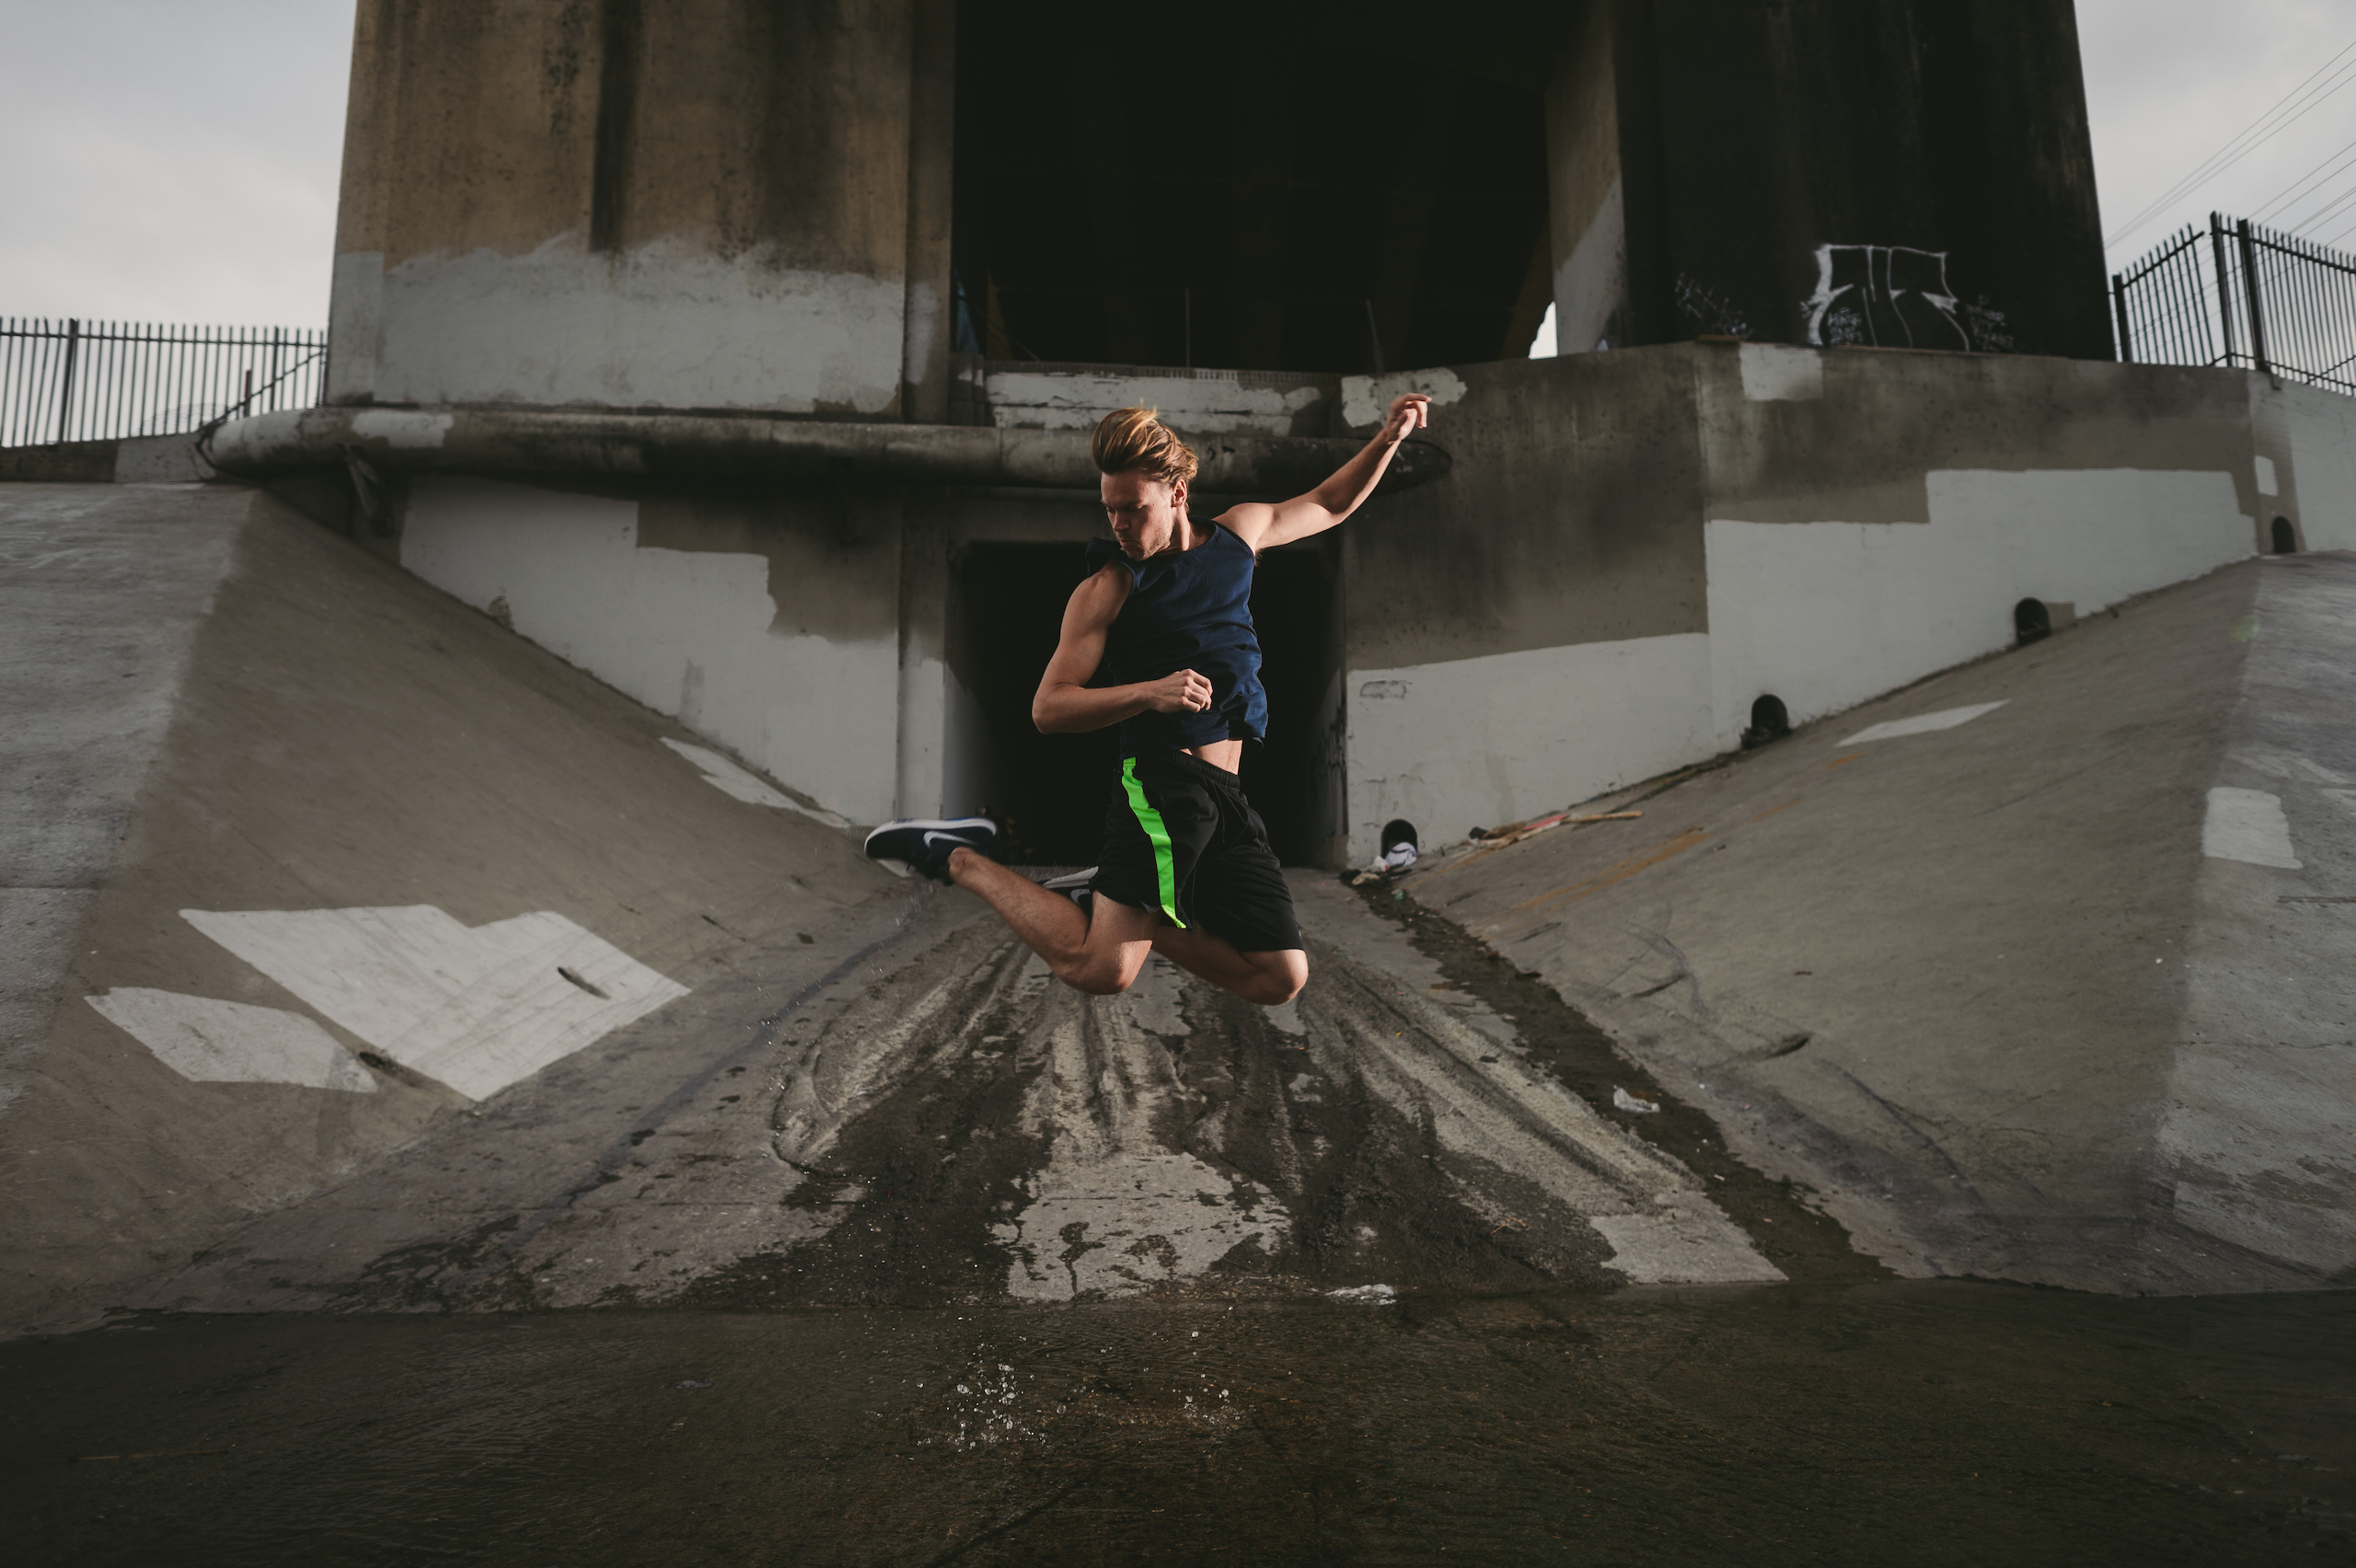 Man jumping in the air in front of a culvert